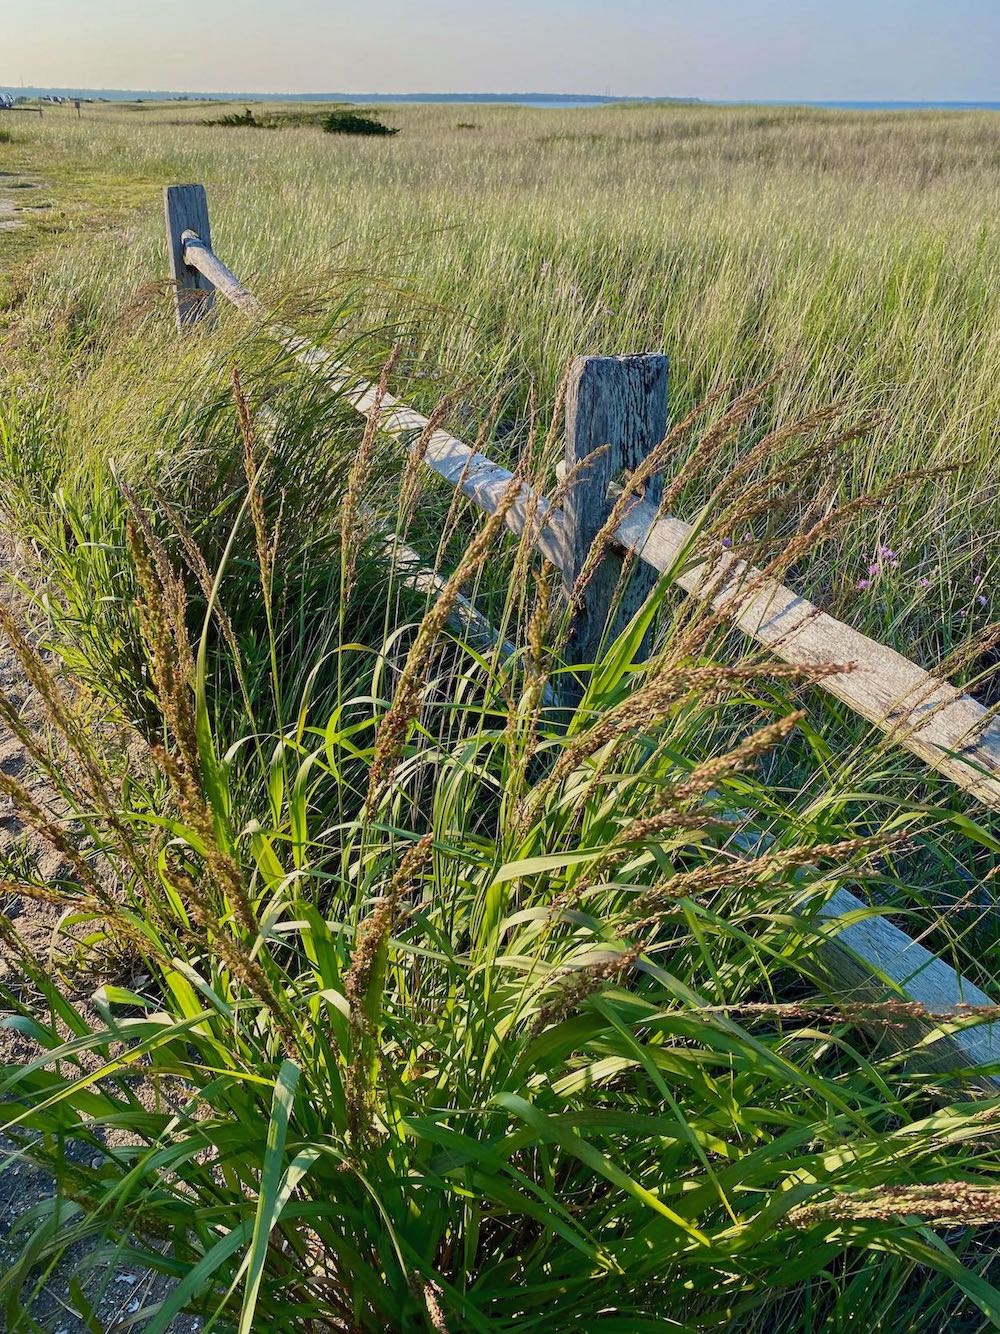 It's the weekend! Number 305, Grasses and Split Rail Fence with an Ocean View